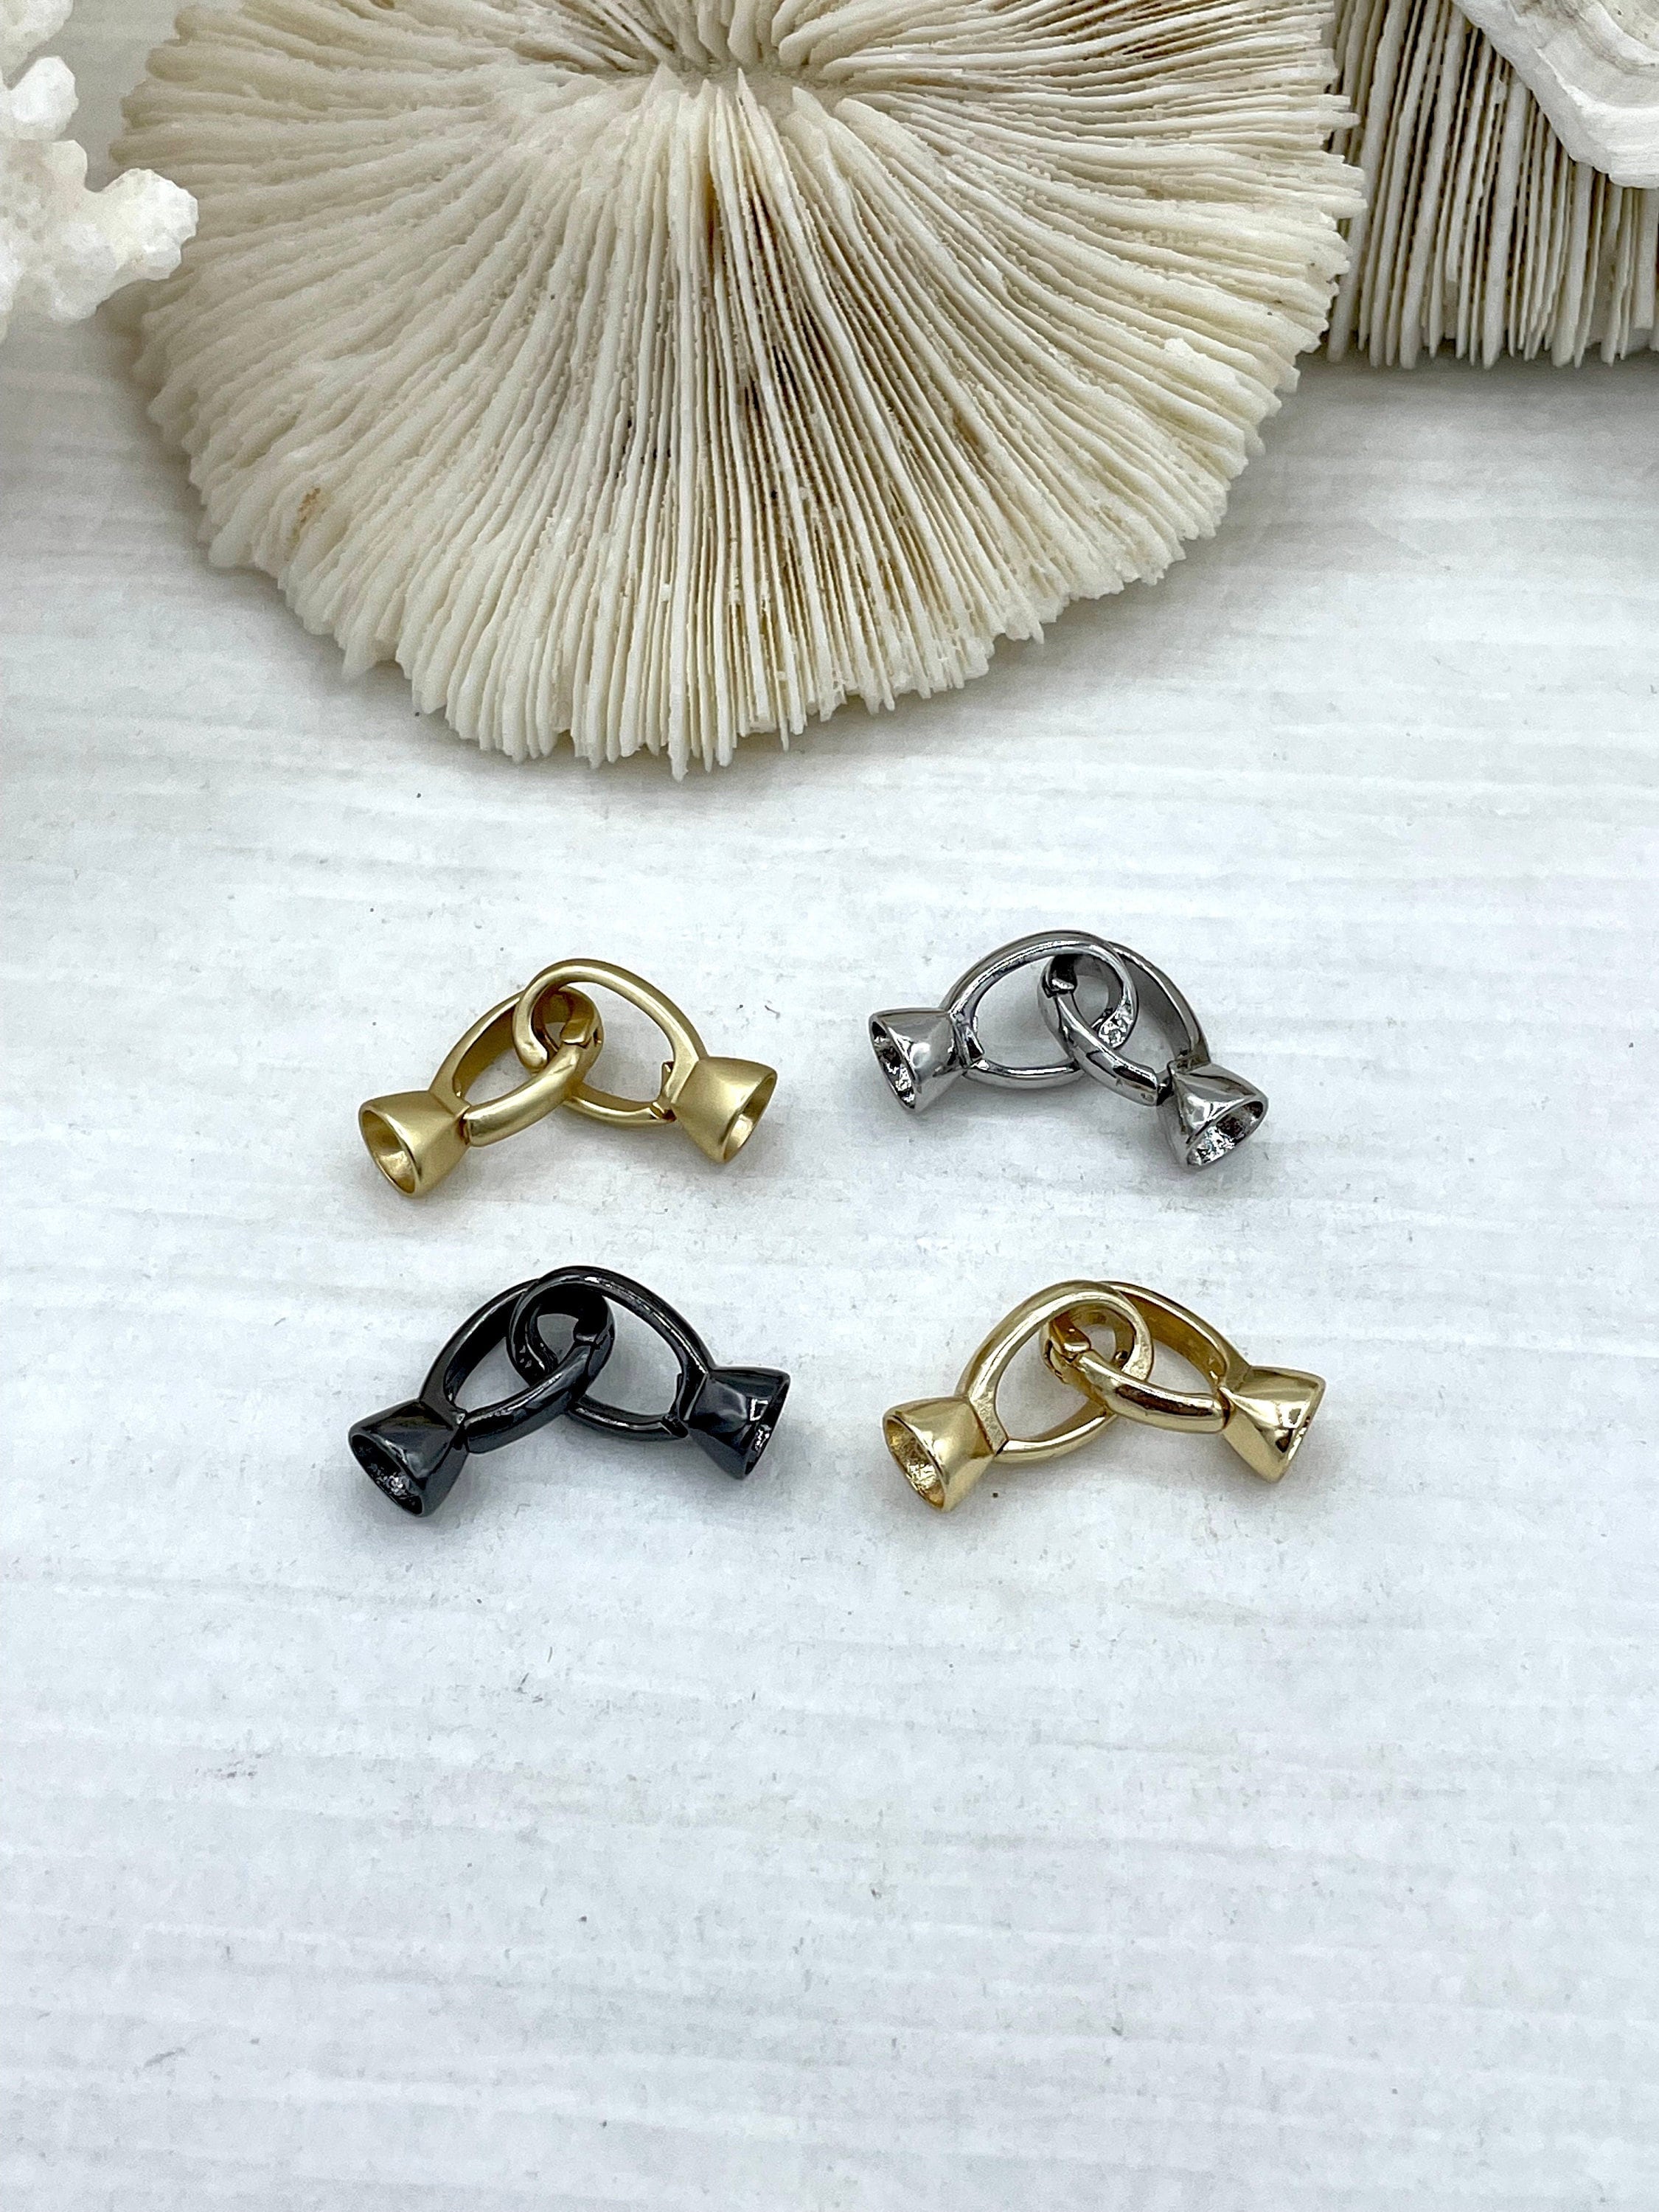 PH PandaHall 20 Sets Fold Over Cord End Caps Brass Lobster Claw Clasps  Terminators Crimp End Tips Necklace Cord Ends for Jewelry Making Silver &  Golden Silver & Golden - 20 Sets